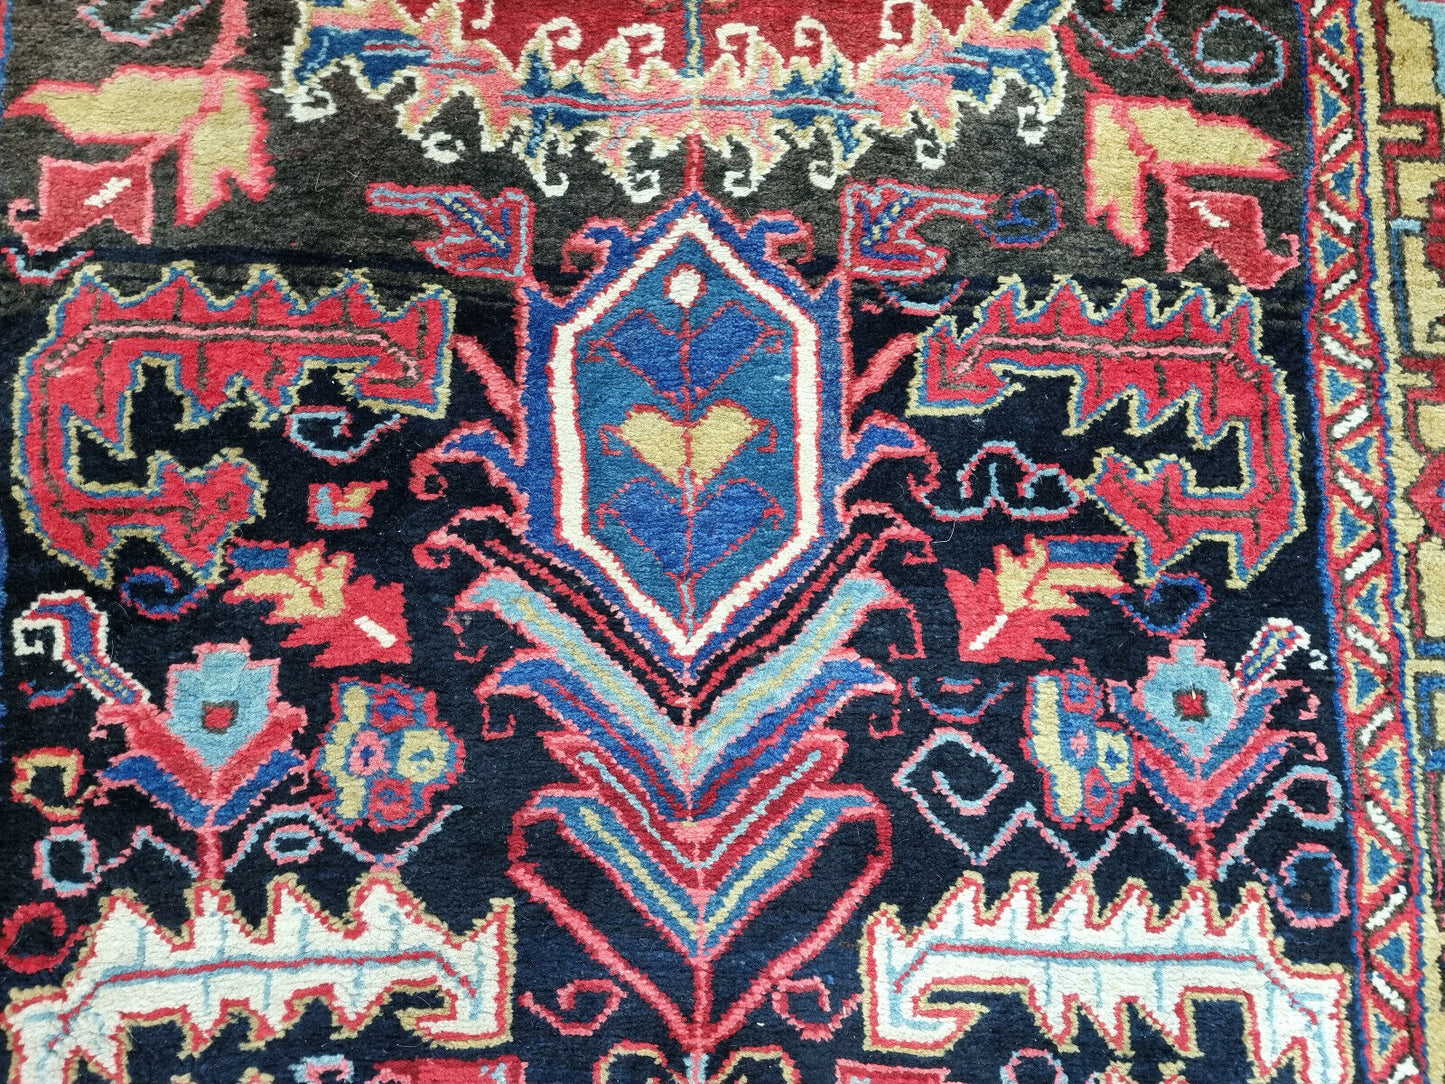 Close-up of wool texture on Handmade Antique Persian Heriz Runner Rug - Detailed view showcasing the wool texture known for its durability and comfort.